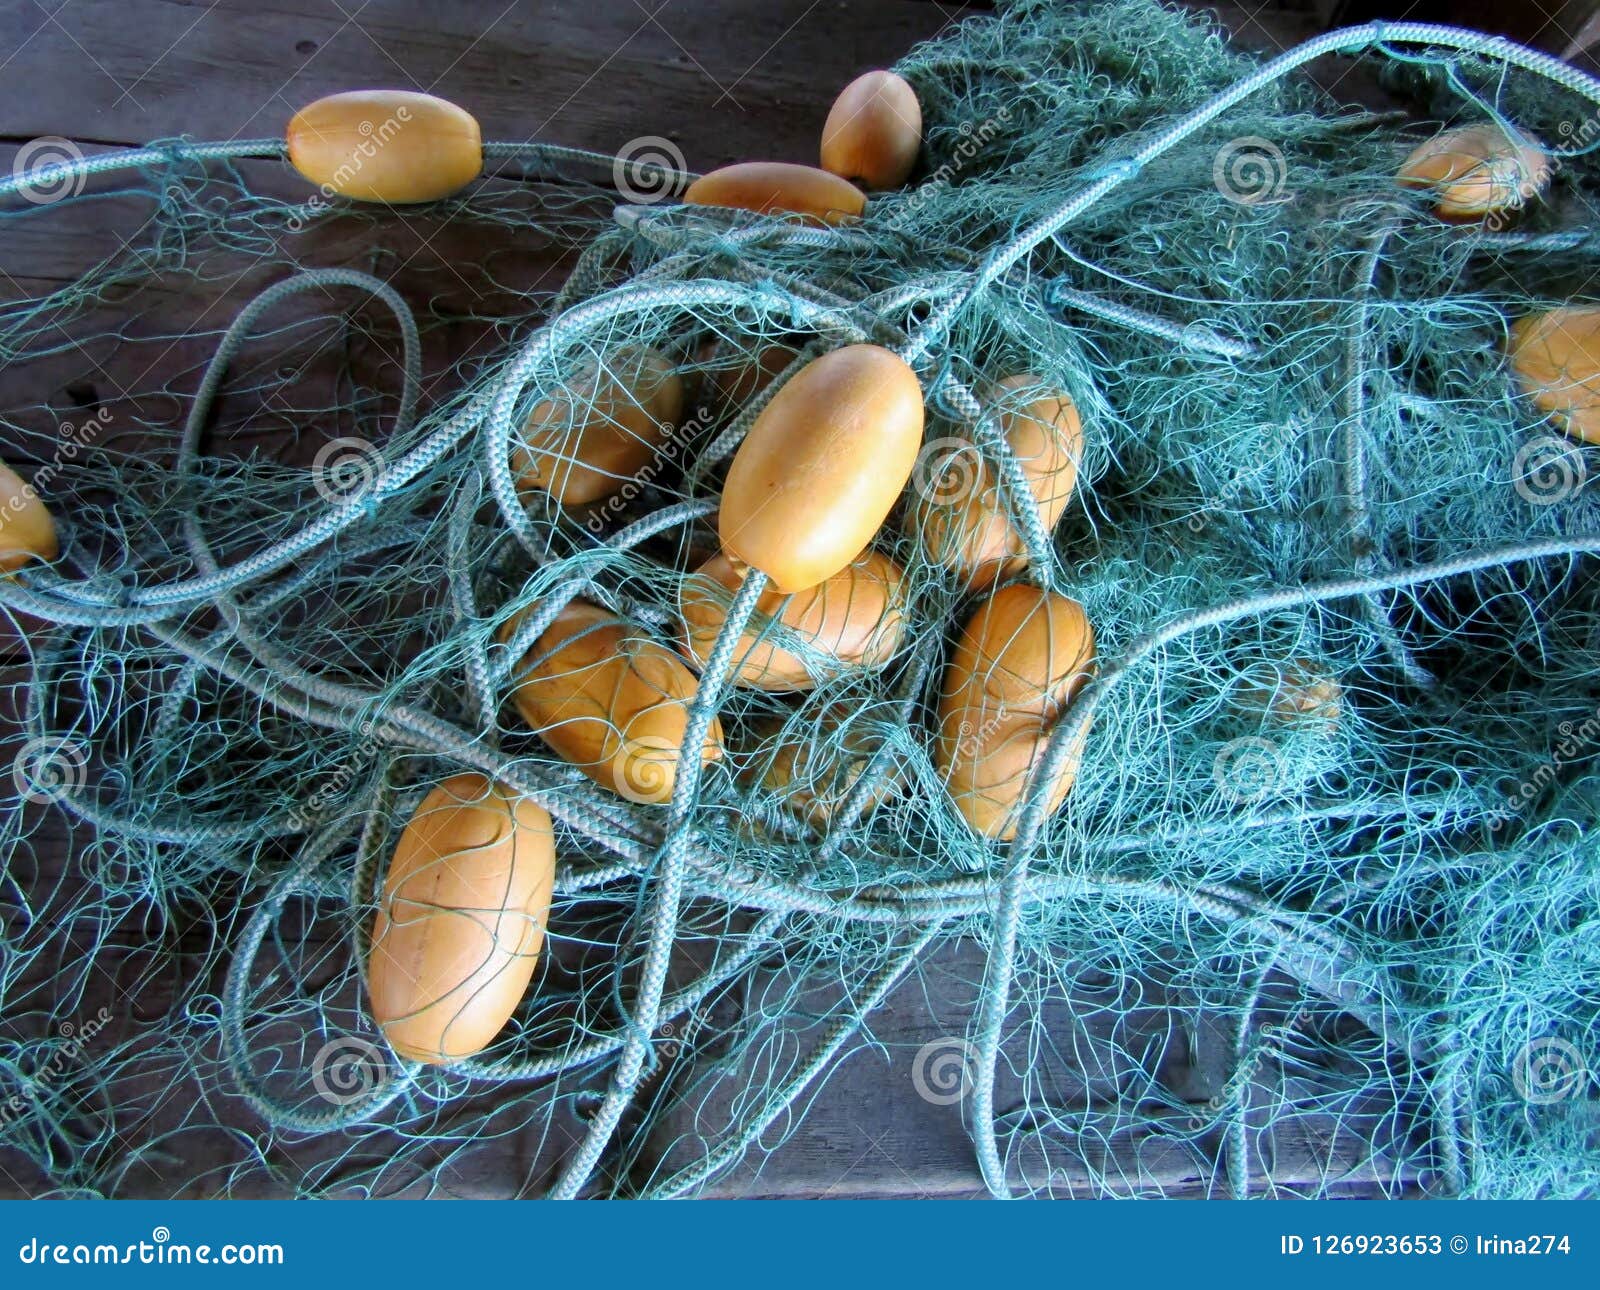 Blue Fishing Net and Floats Close Up Stock Image - Image of